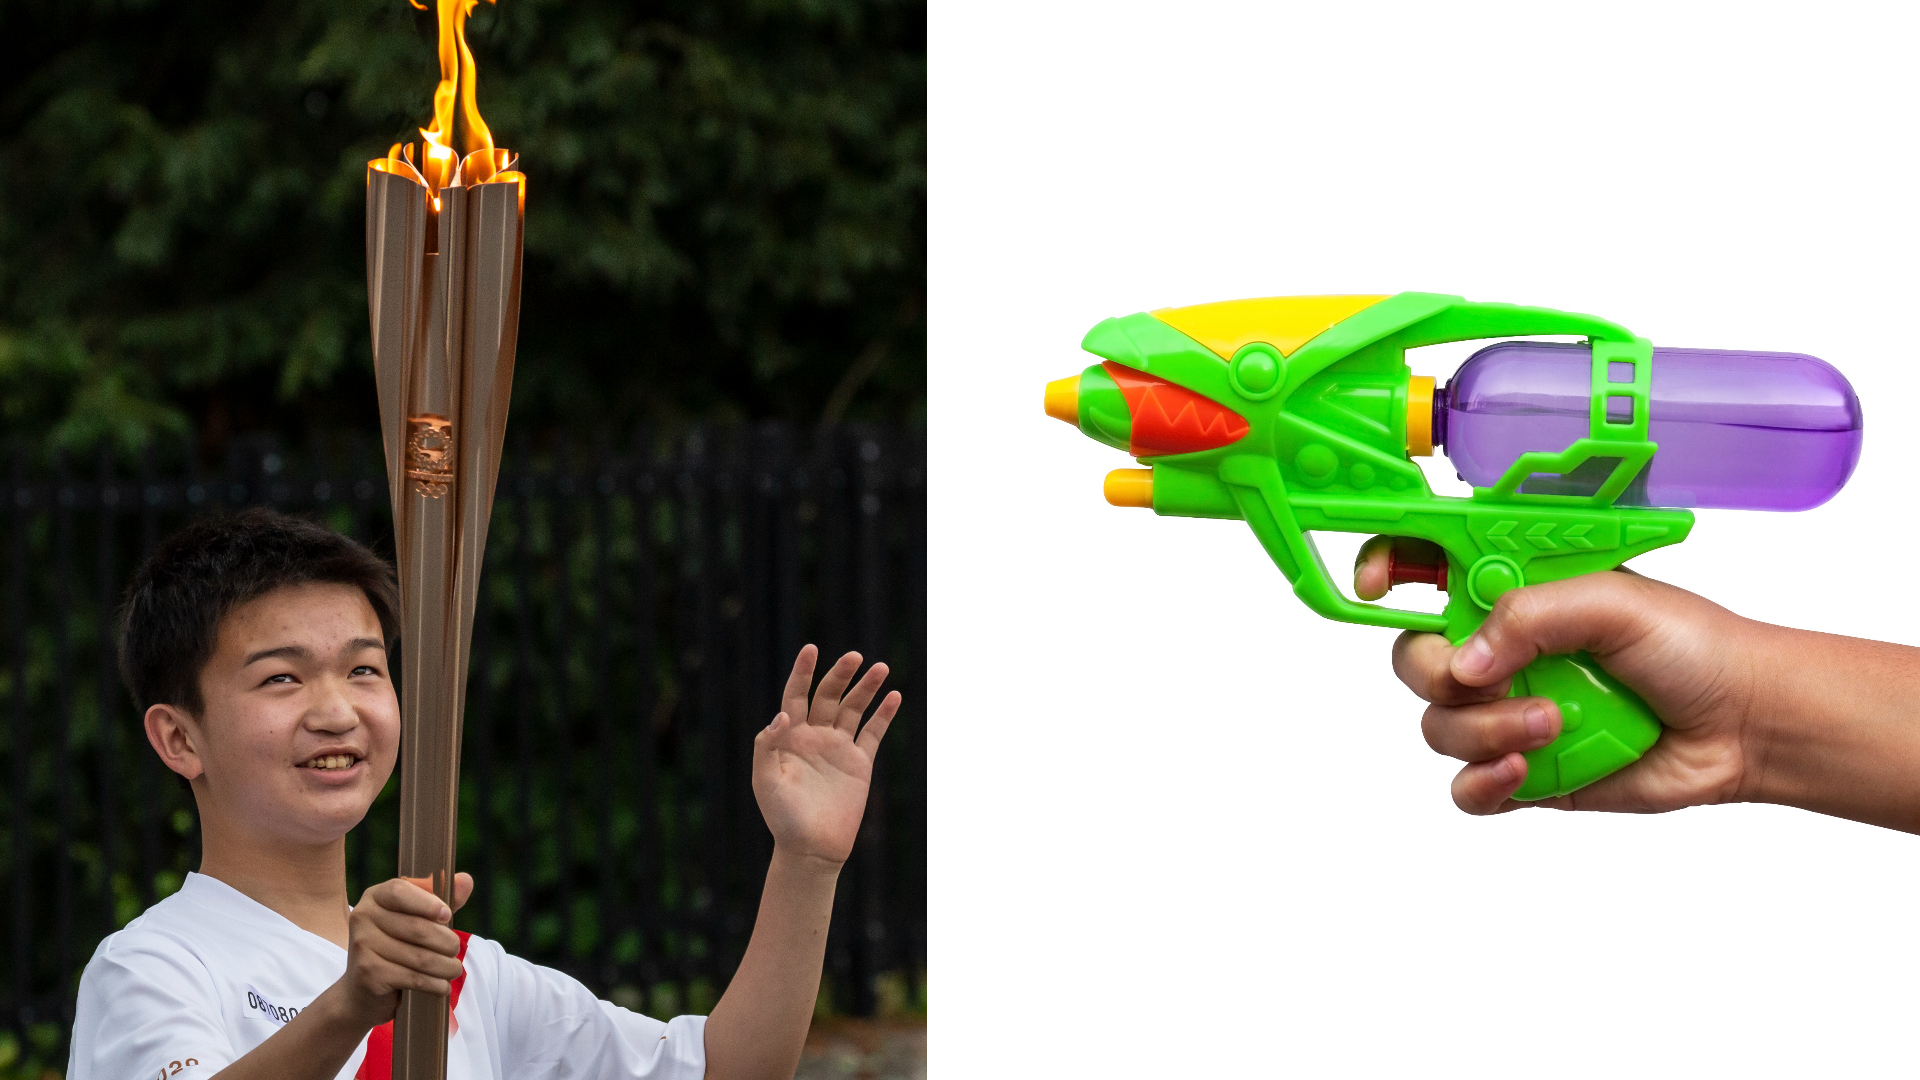 Woman Arrested for Trying to Put Out the Olympic Torch With Water Gun